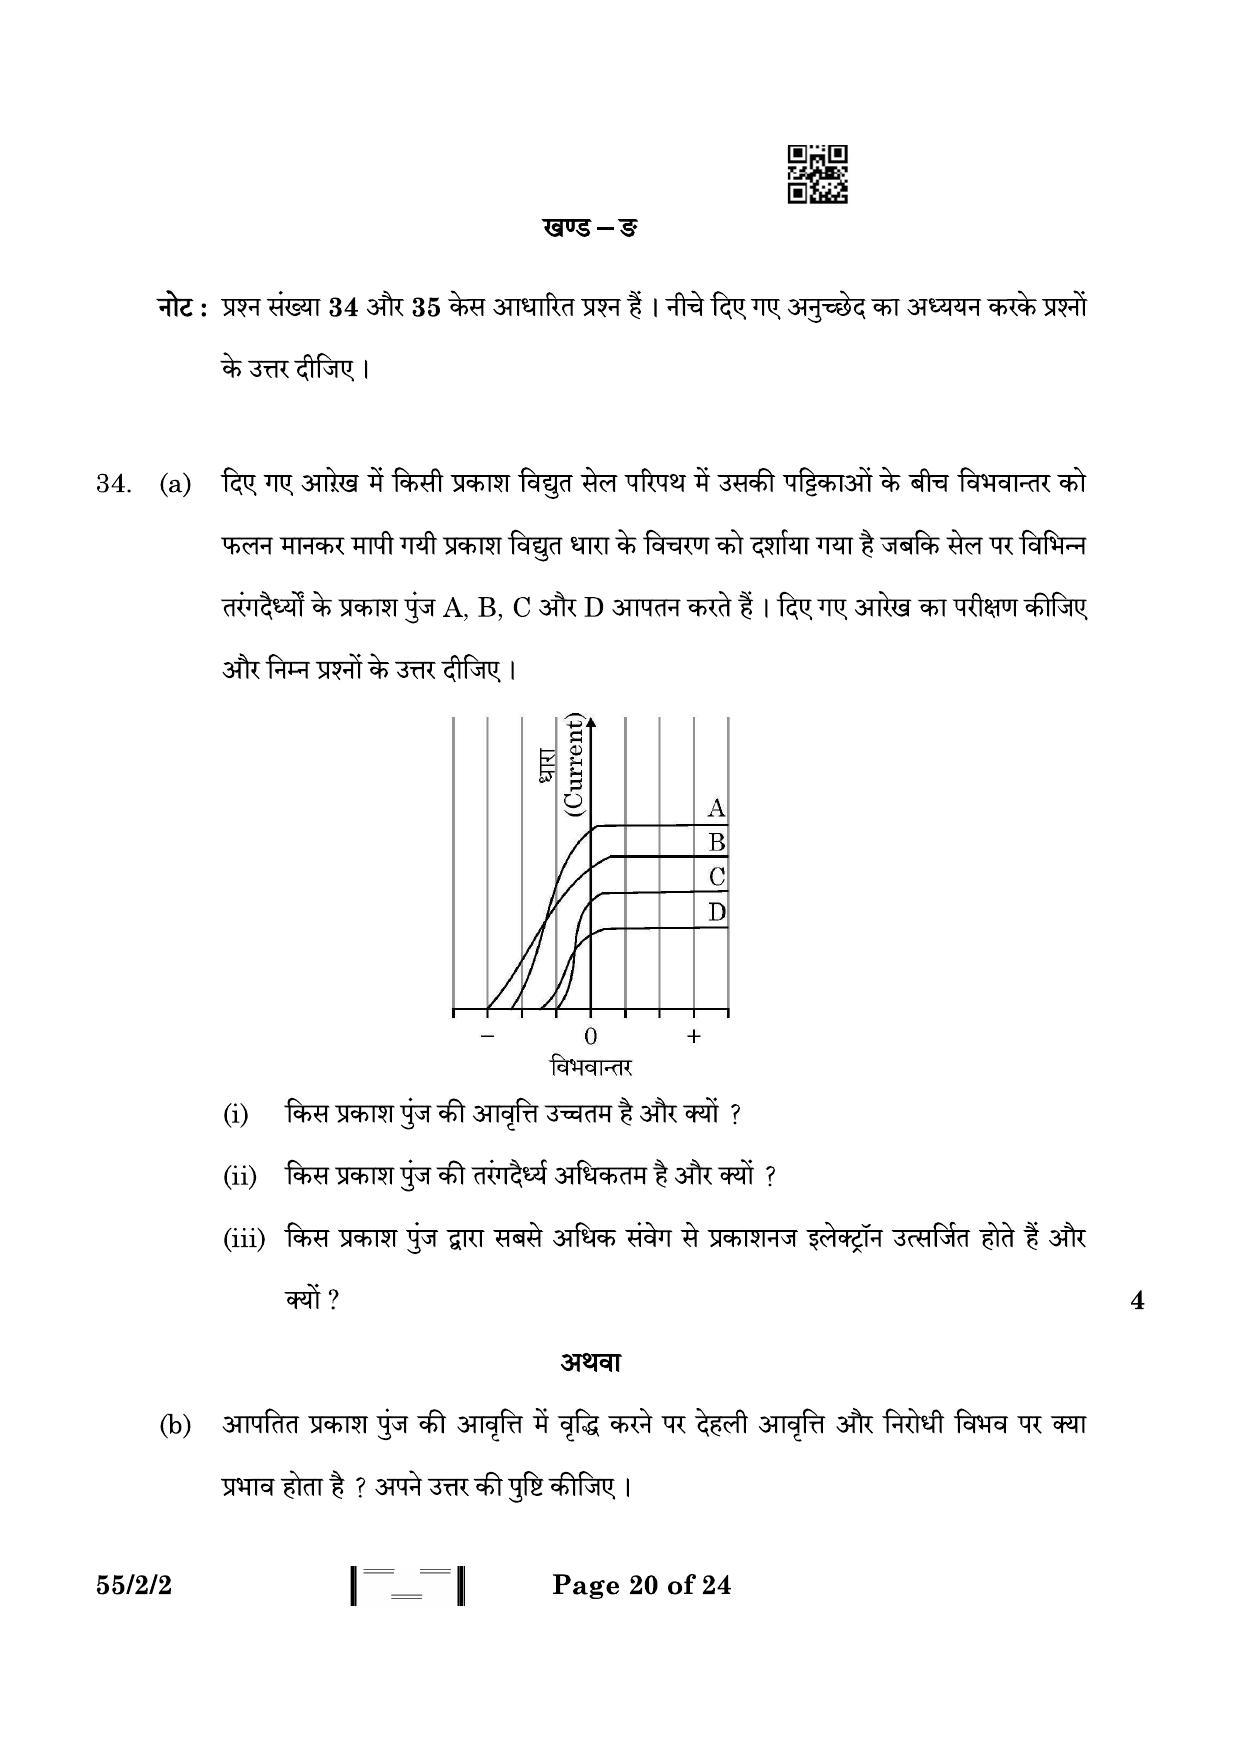 CBSE Class 12 55-2-2 Physics 2023 Question Paper - Page 20